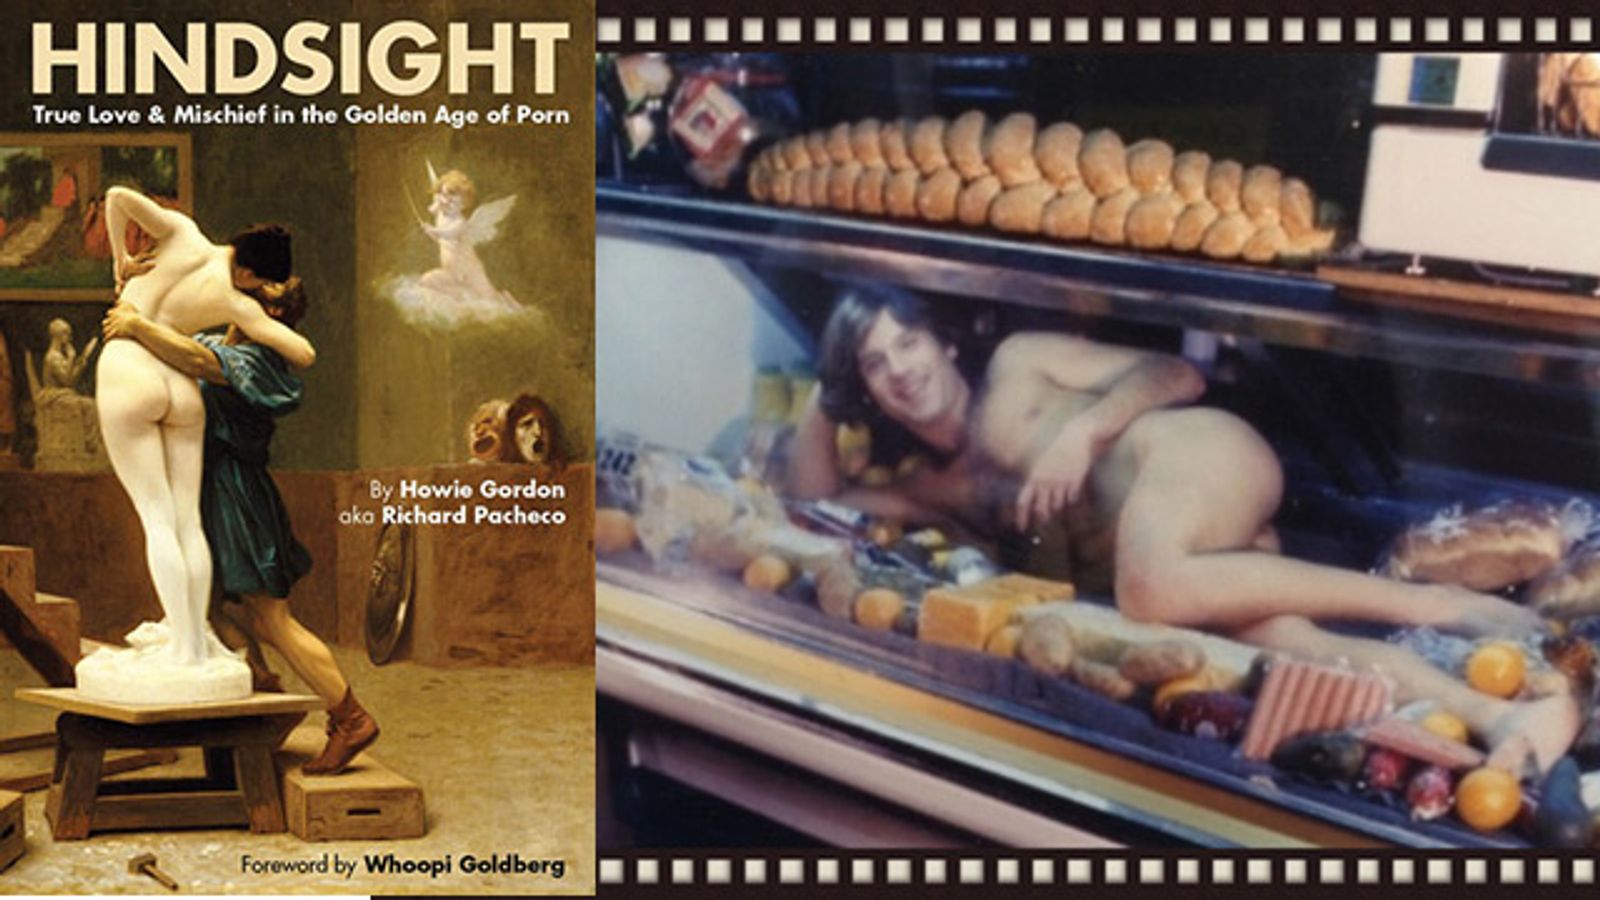 Review: Hindsight: True Love & Mischief in the Golden Age of Porn